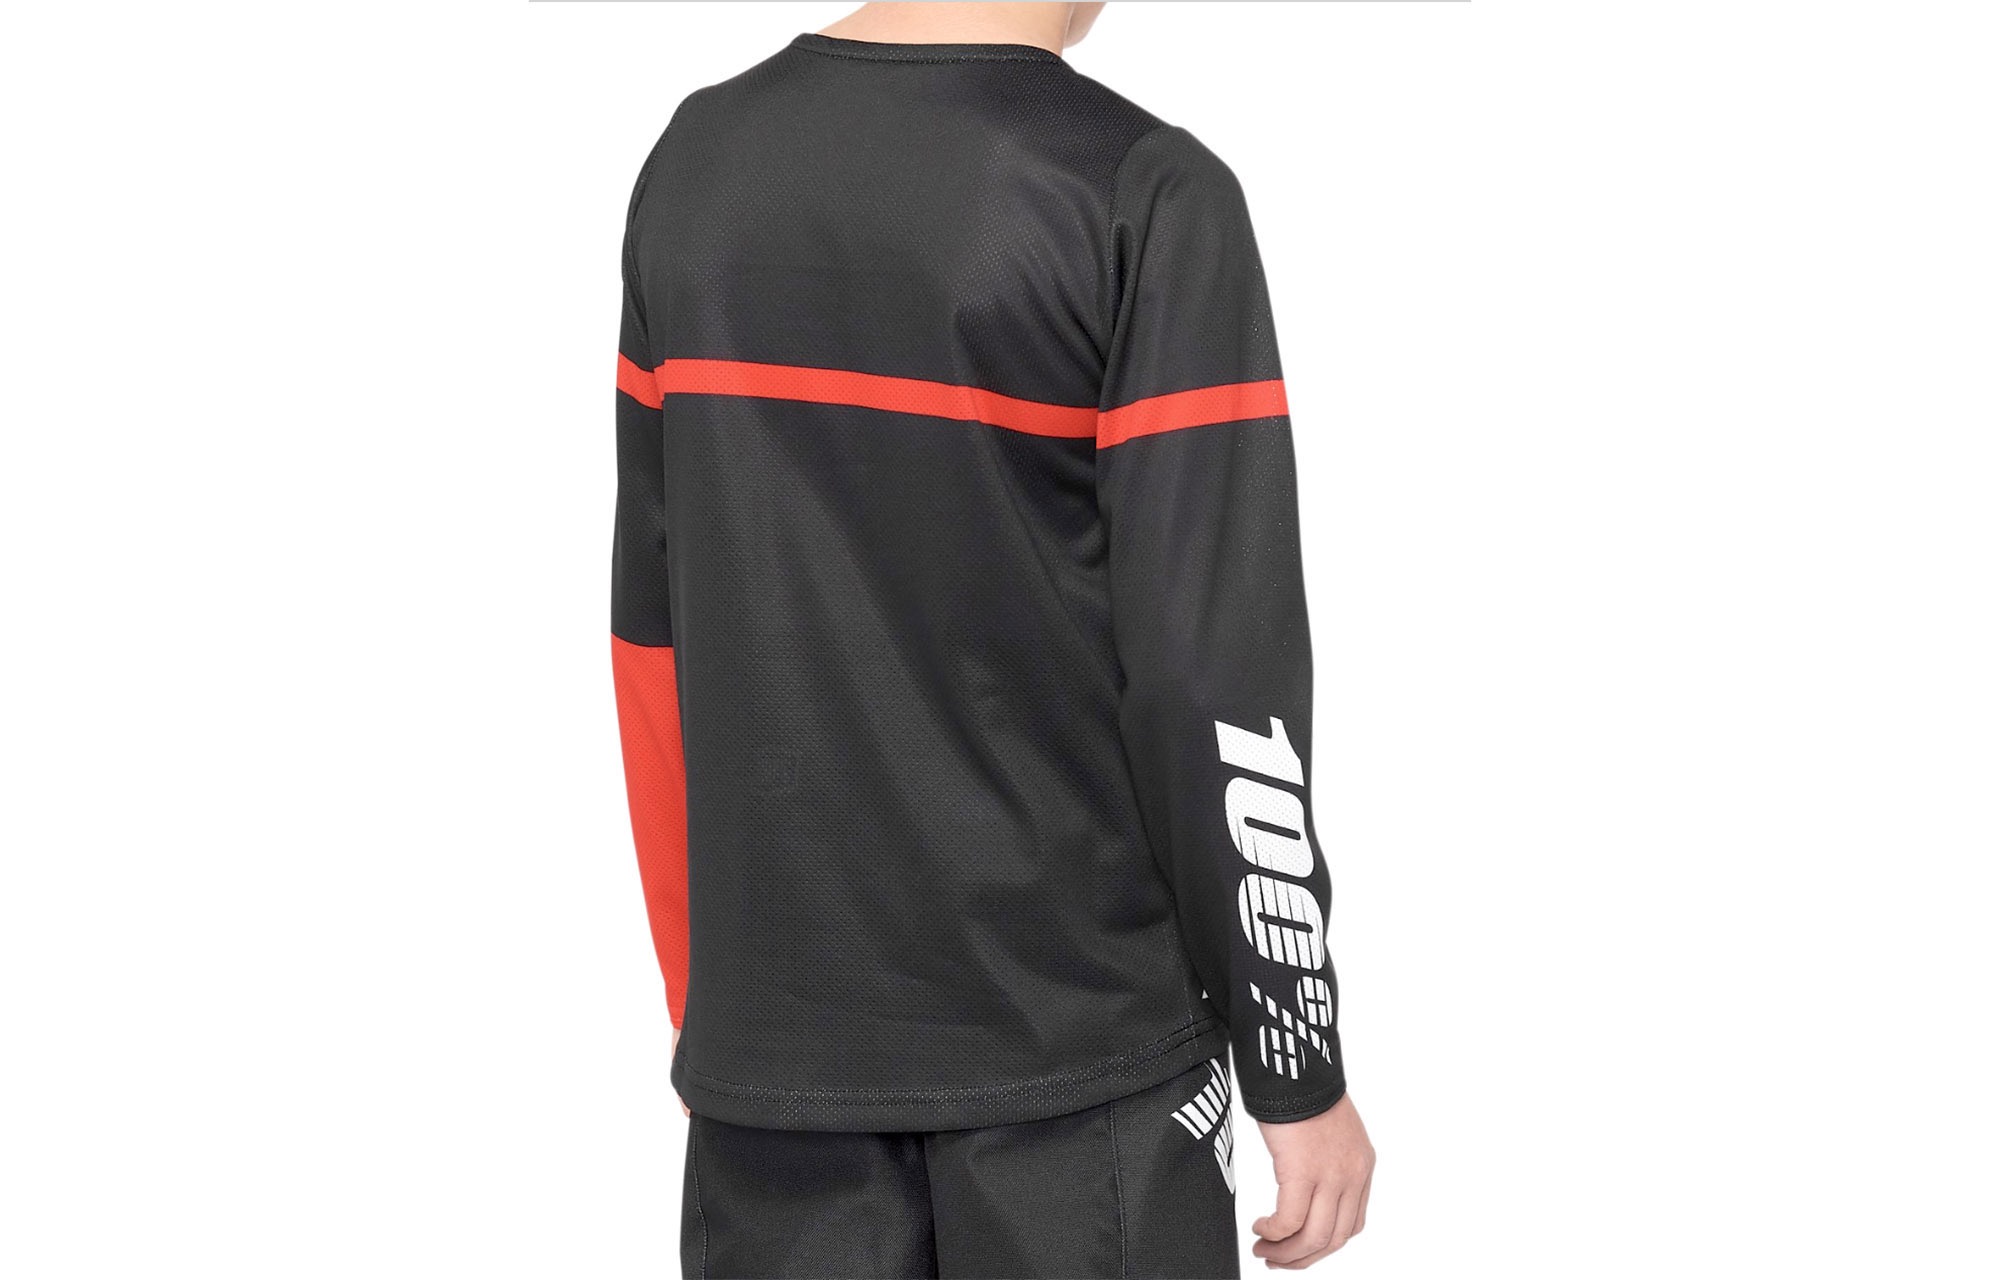 100% KIDS LONG SLEEVE R-CORE X JERSEY BLACK/RED image number 0